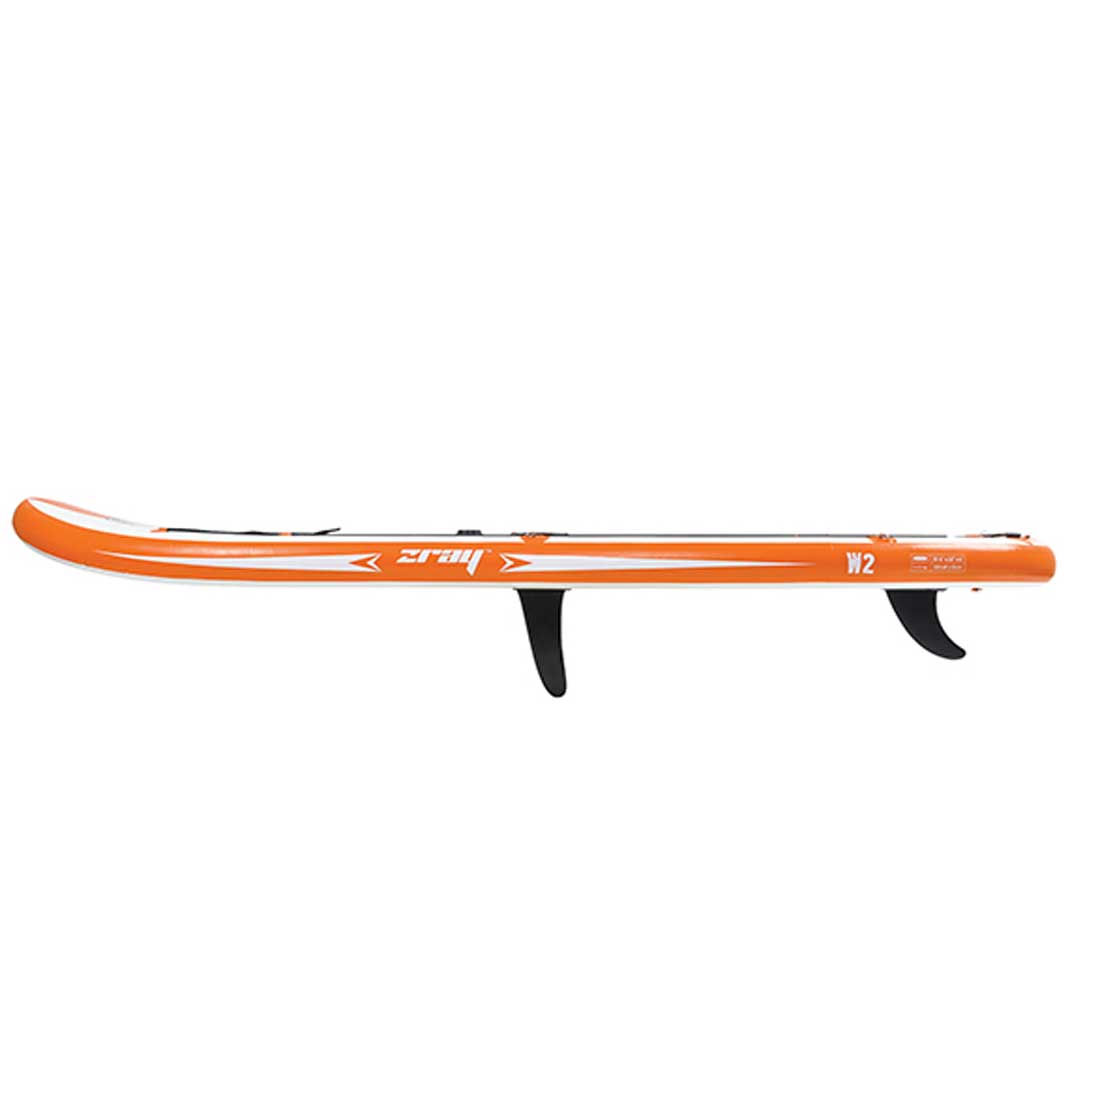 Stand up paddle board W2 ZRAY - ailerons